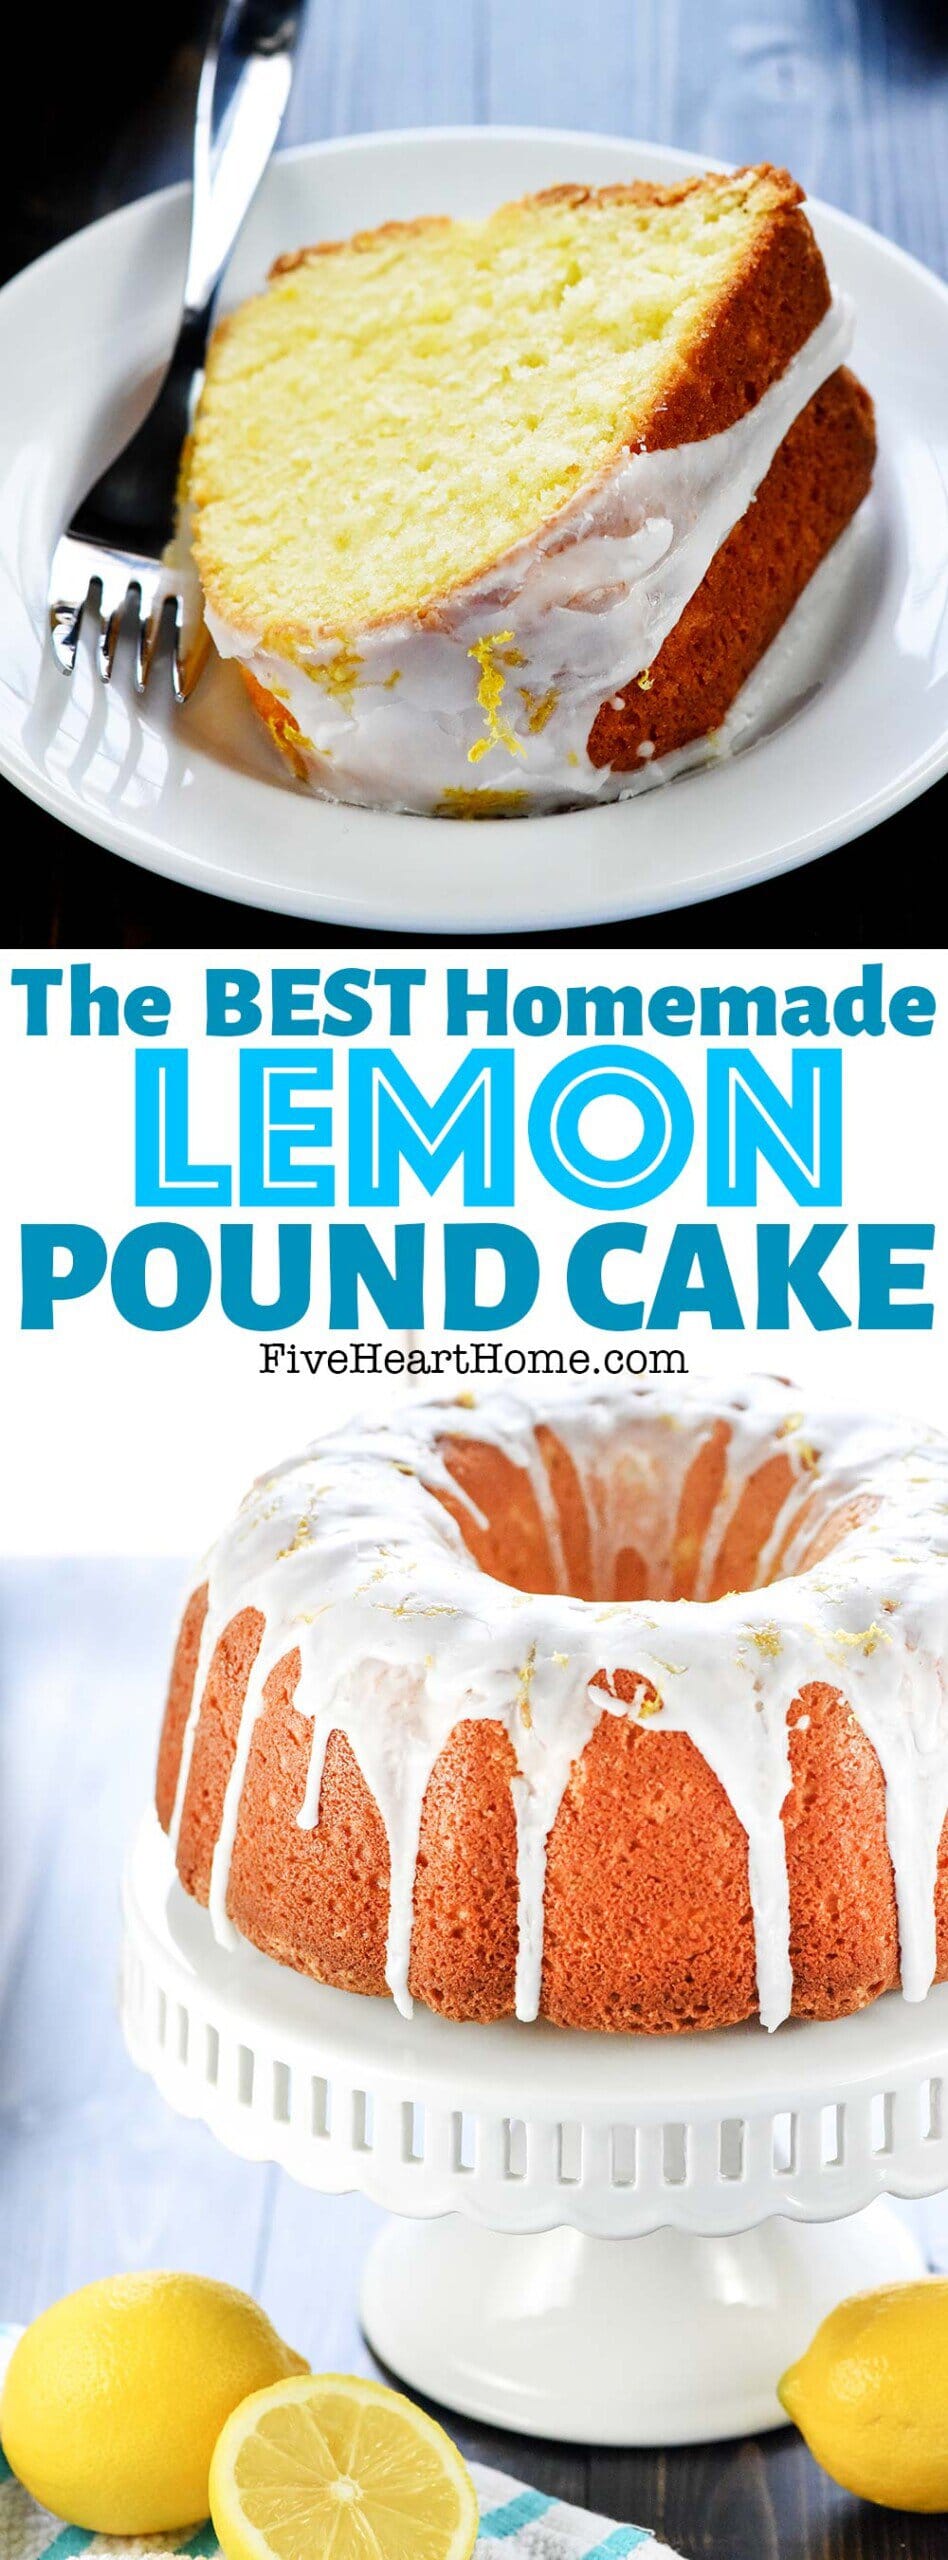 Lemon Pound Cake ~ soft and moist with a golden exterior and a tangy lemon glaze! Better yet, this easy lemon pound cake recipe makes a scrumptious dessert for Easter, spring, or summer! | FiveHeartHome.com via @fivehearthome